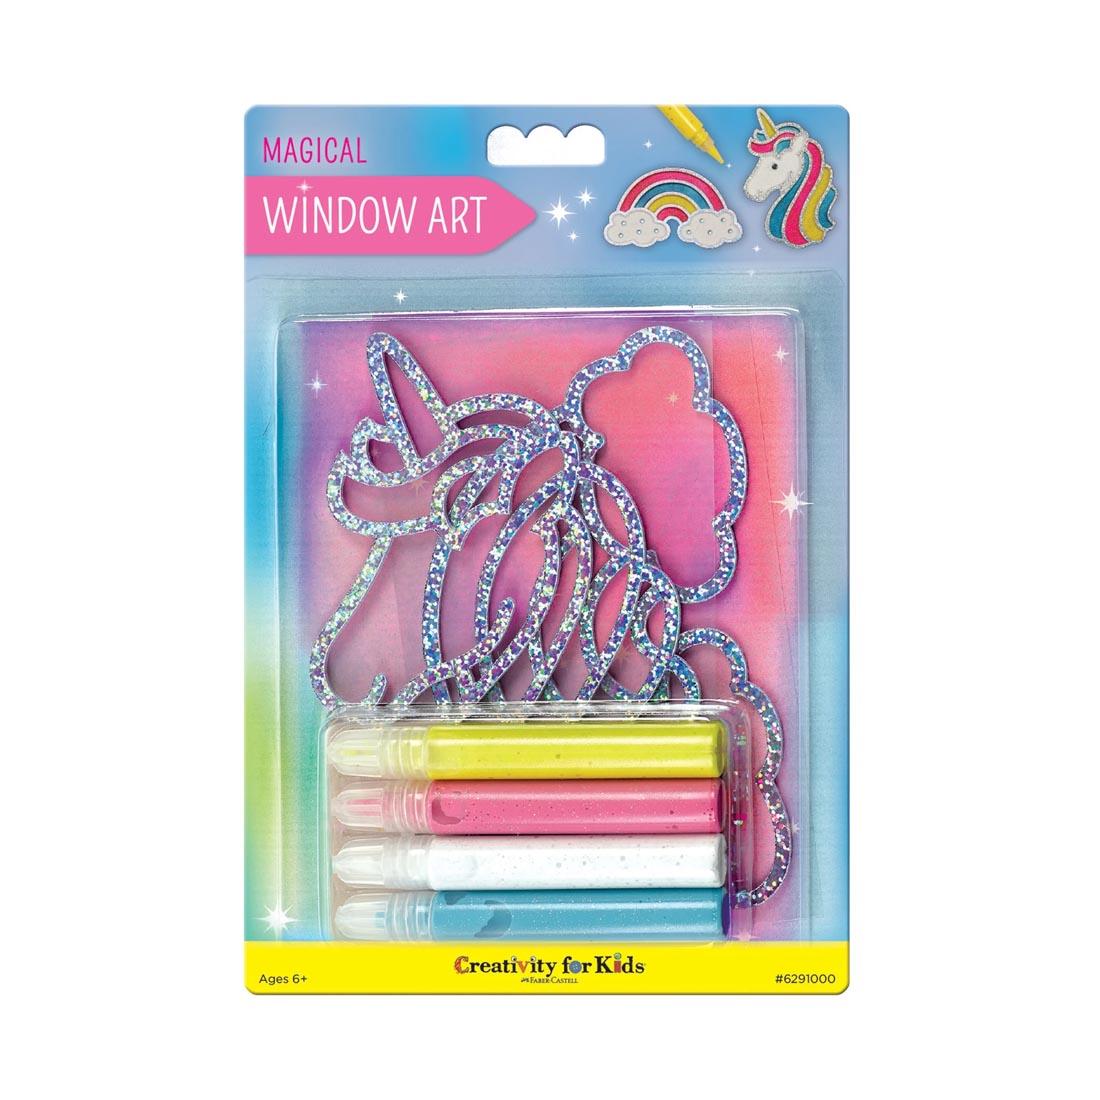 Magical Window Art Kit By Creativity For Kids